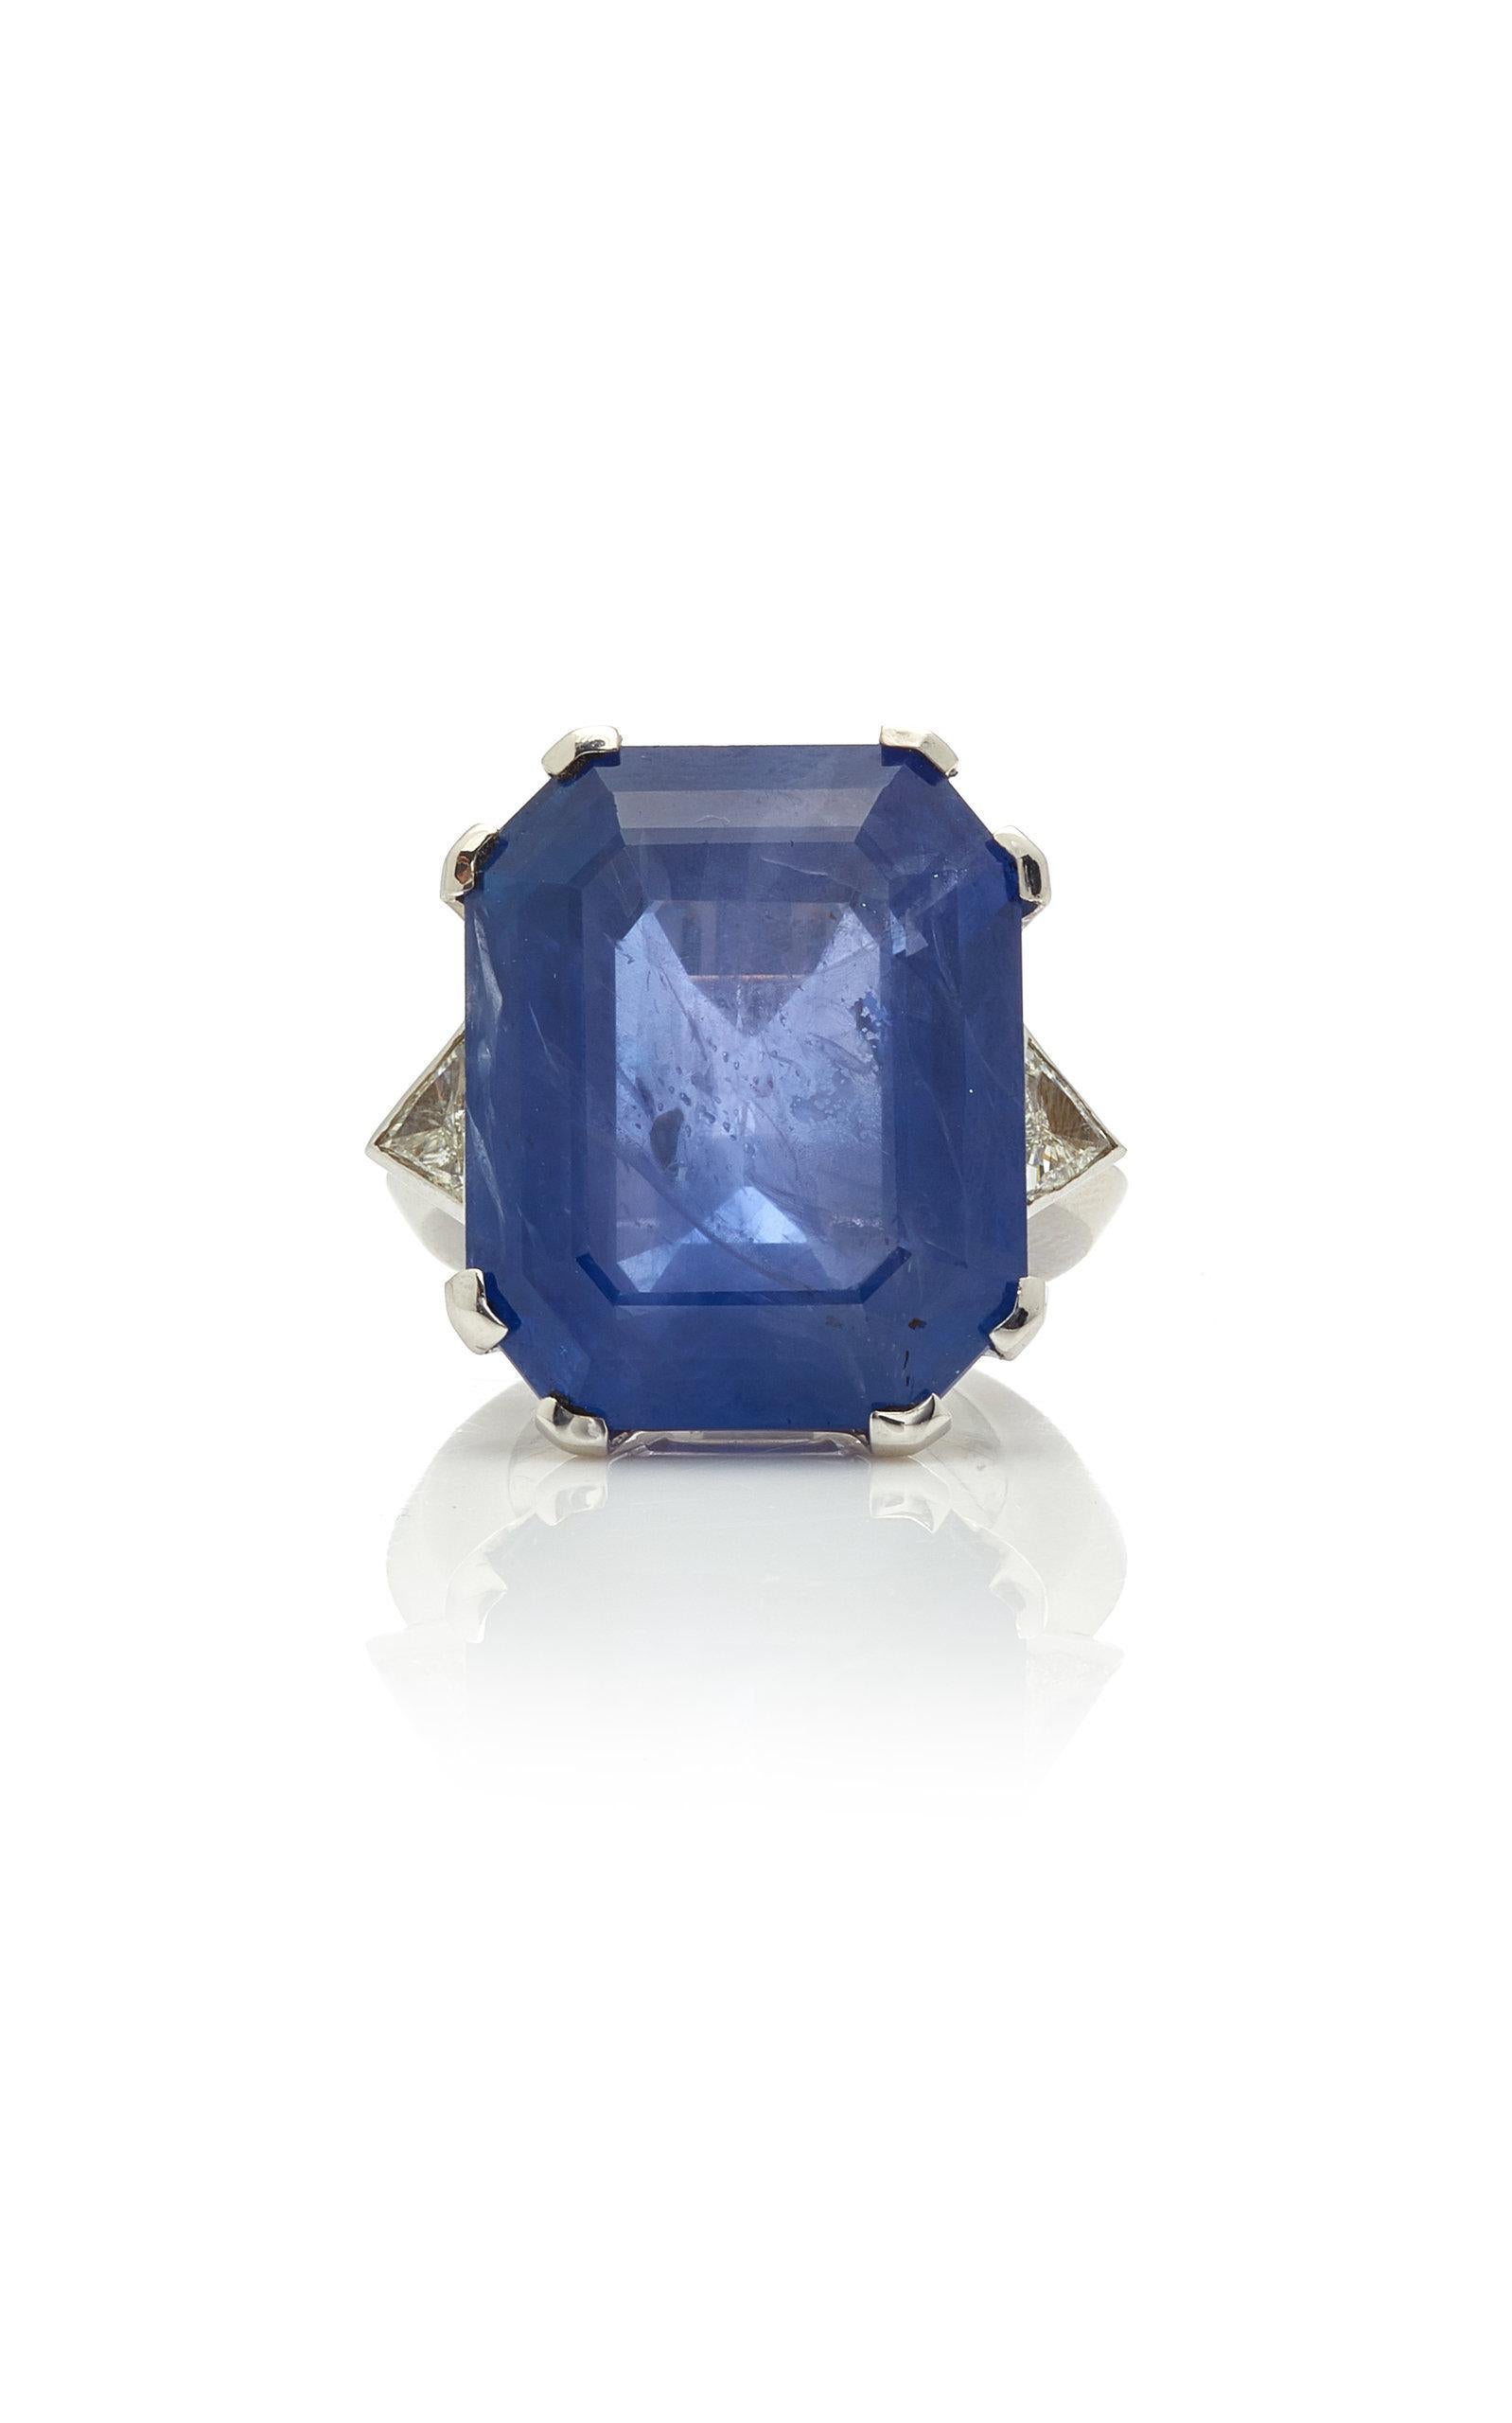 A showy ring mounted on 18kt white gold, highlighted with triangular cut diamonds, showcasing a large rectangular cut sapphire (ceylon origin, 50 cts). Made in Italy, circa 1960s.